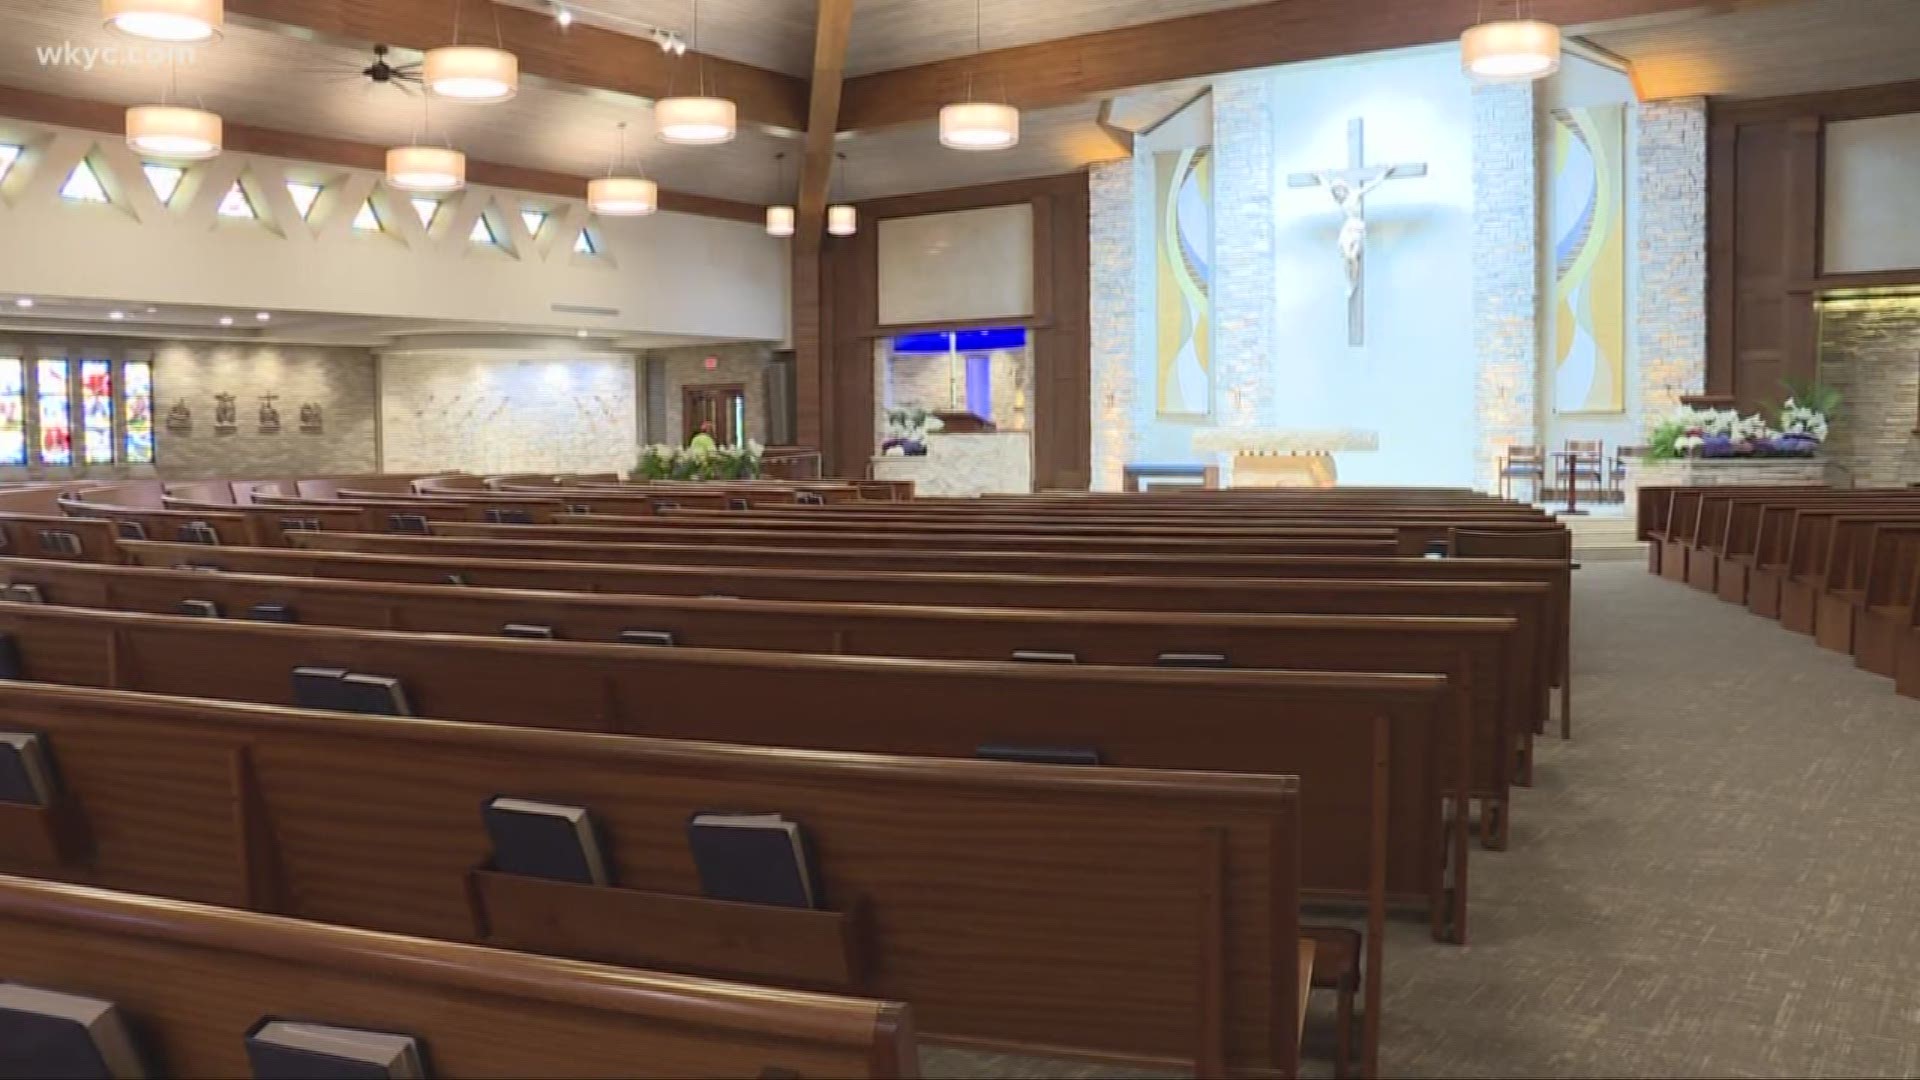 Local church loses nearly 2 million dollars to hackers